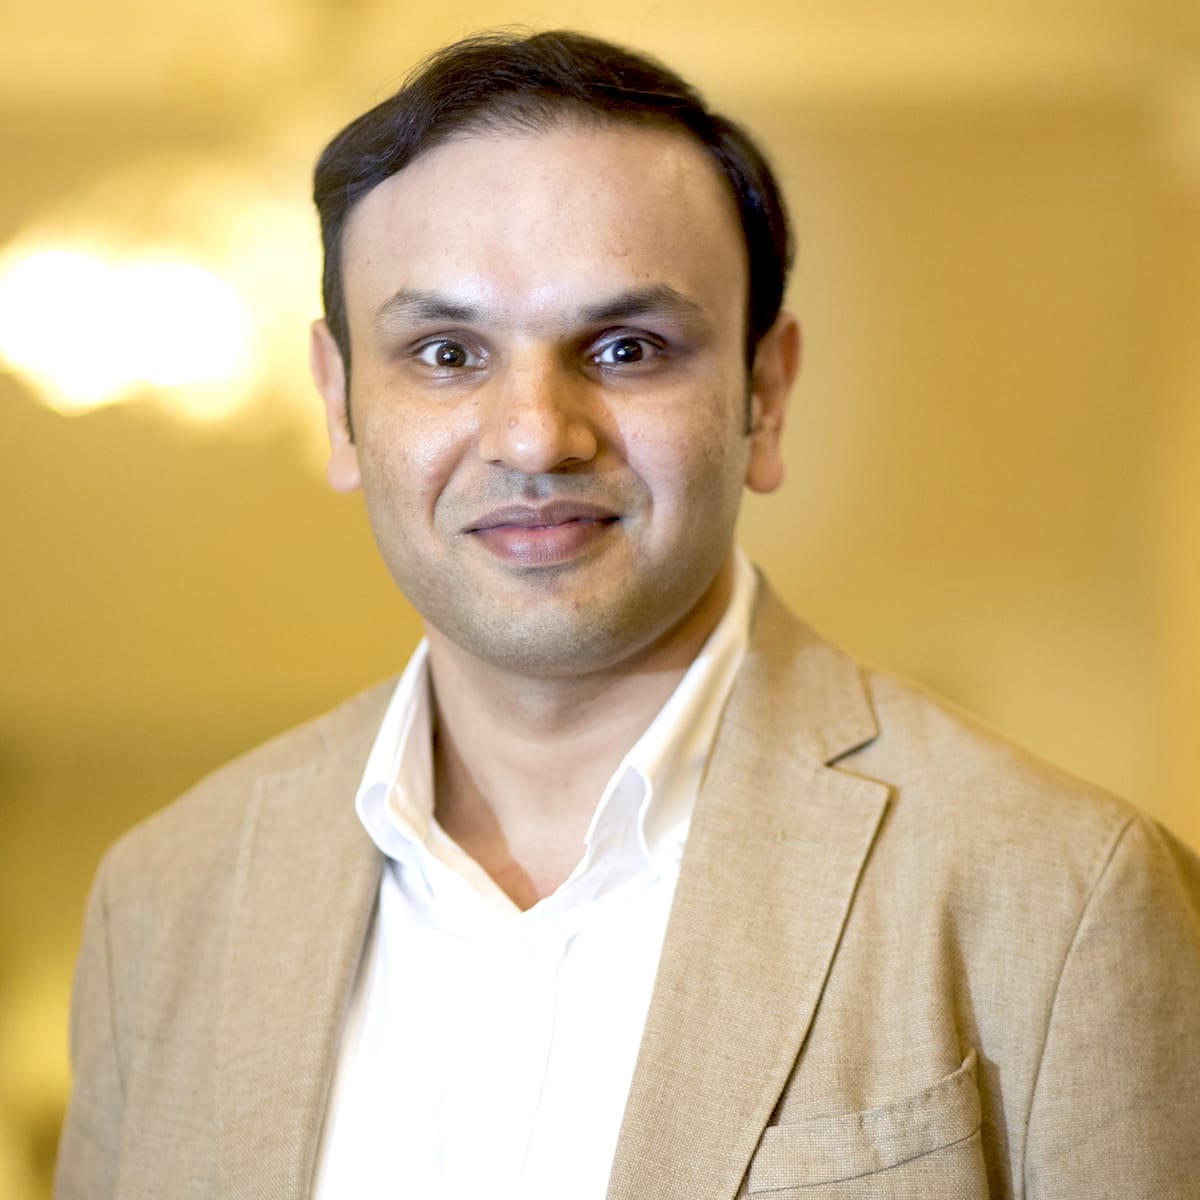 bharatpe-appoints-ex-walmart-labs-ankur-jain-as-its-chief-product-officer